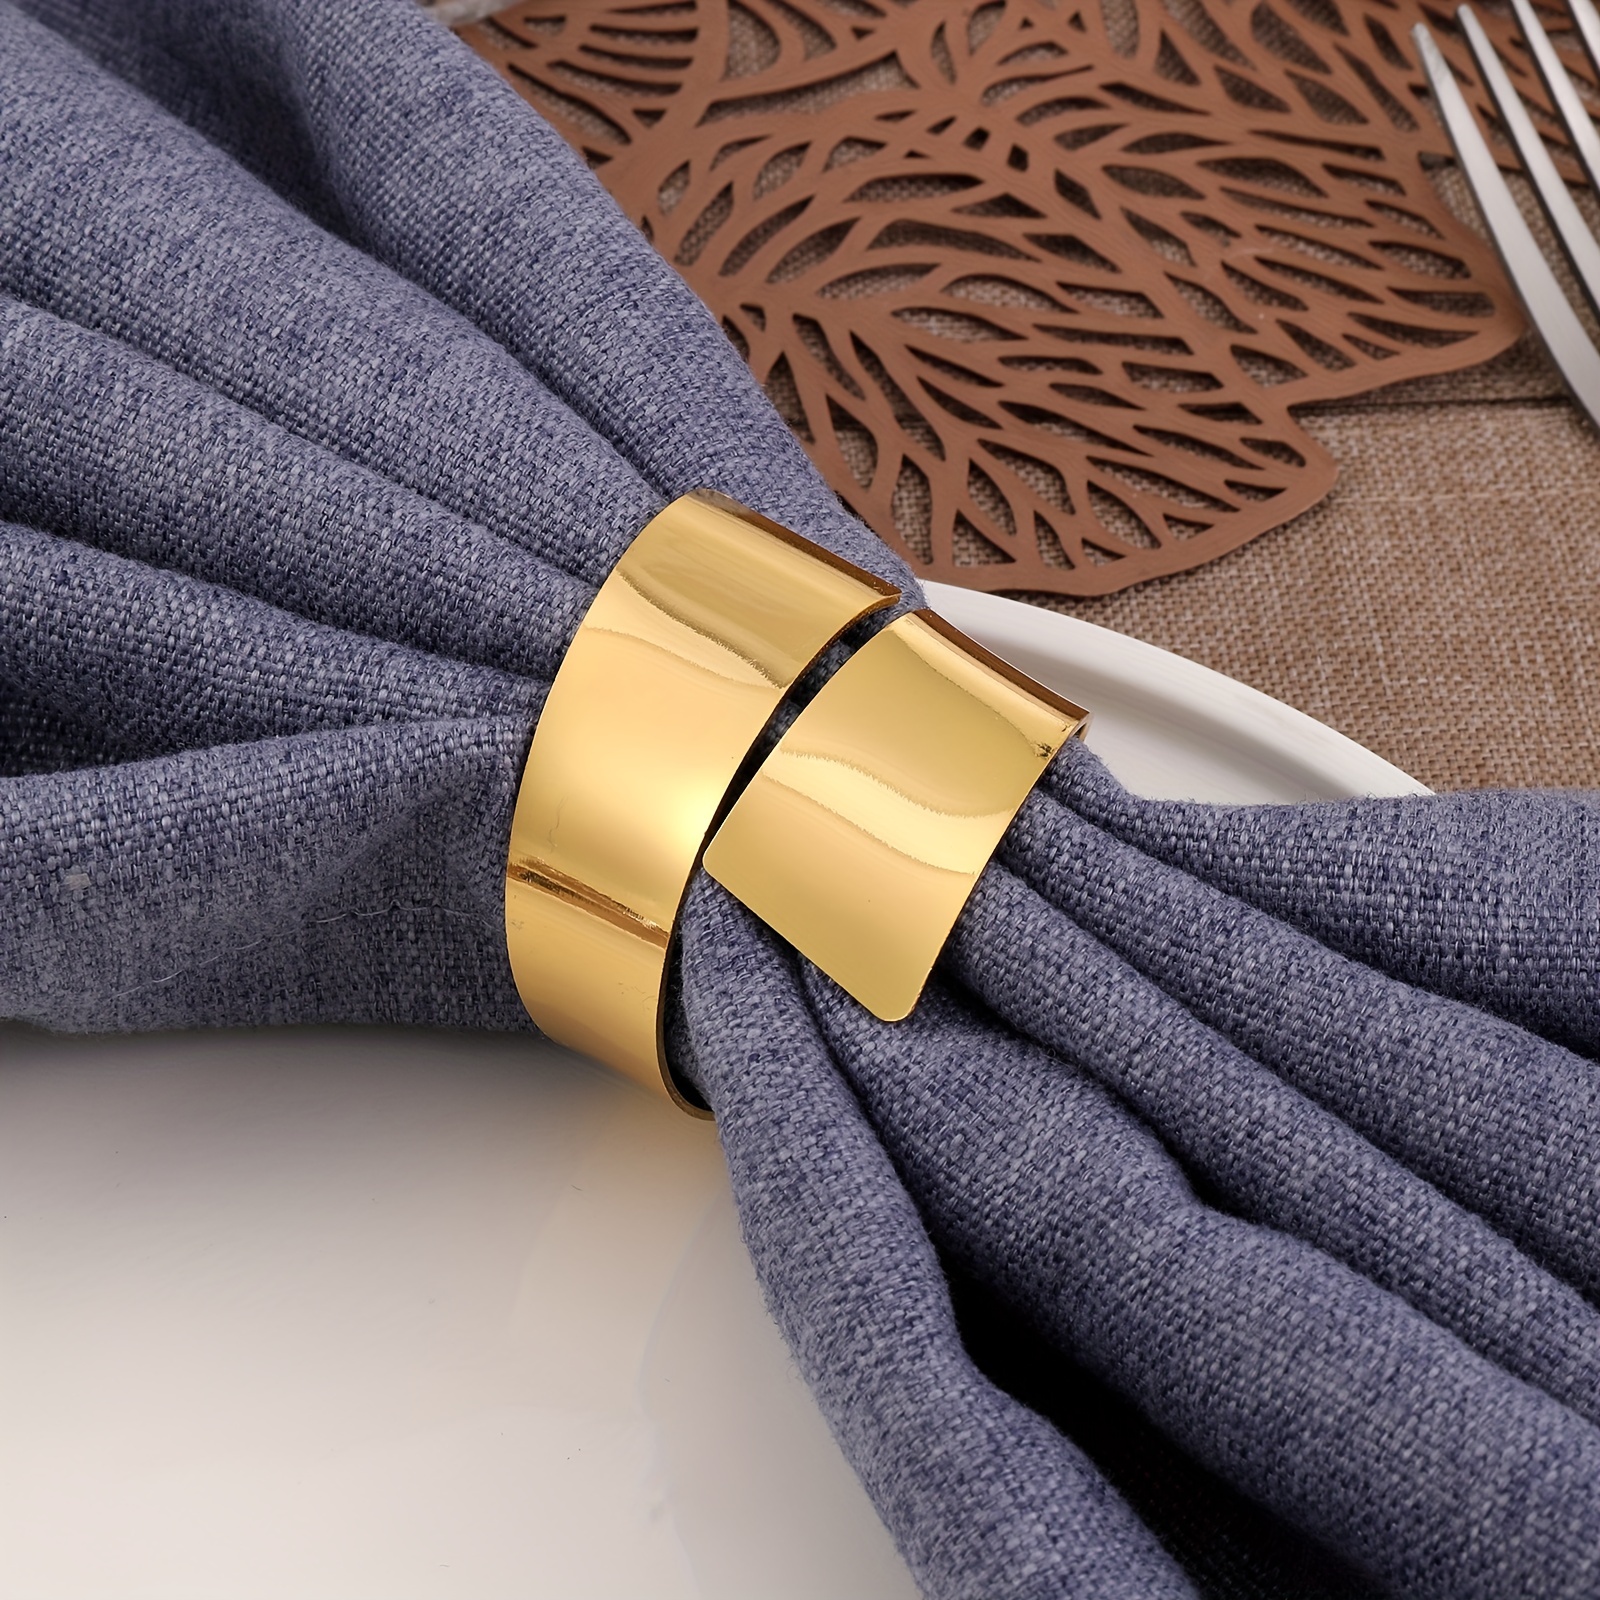 4pcs, Napkin Rings, Napkin Clasps, Napkin Rings Are Suitable For Birthday,  Wedding, Thanksgiving, Christmas, Banquet, Easter, Halloween, Thanksgiving